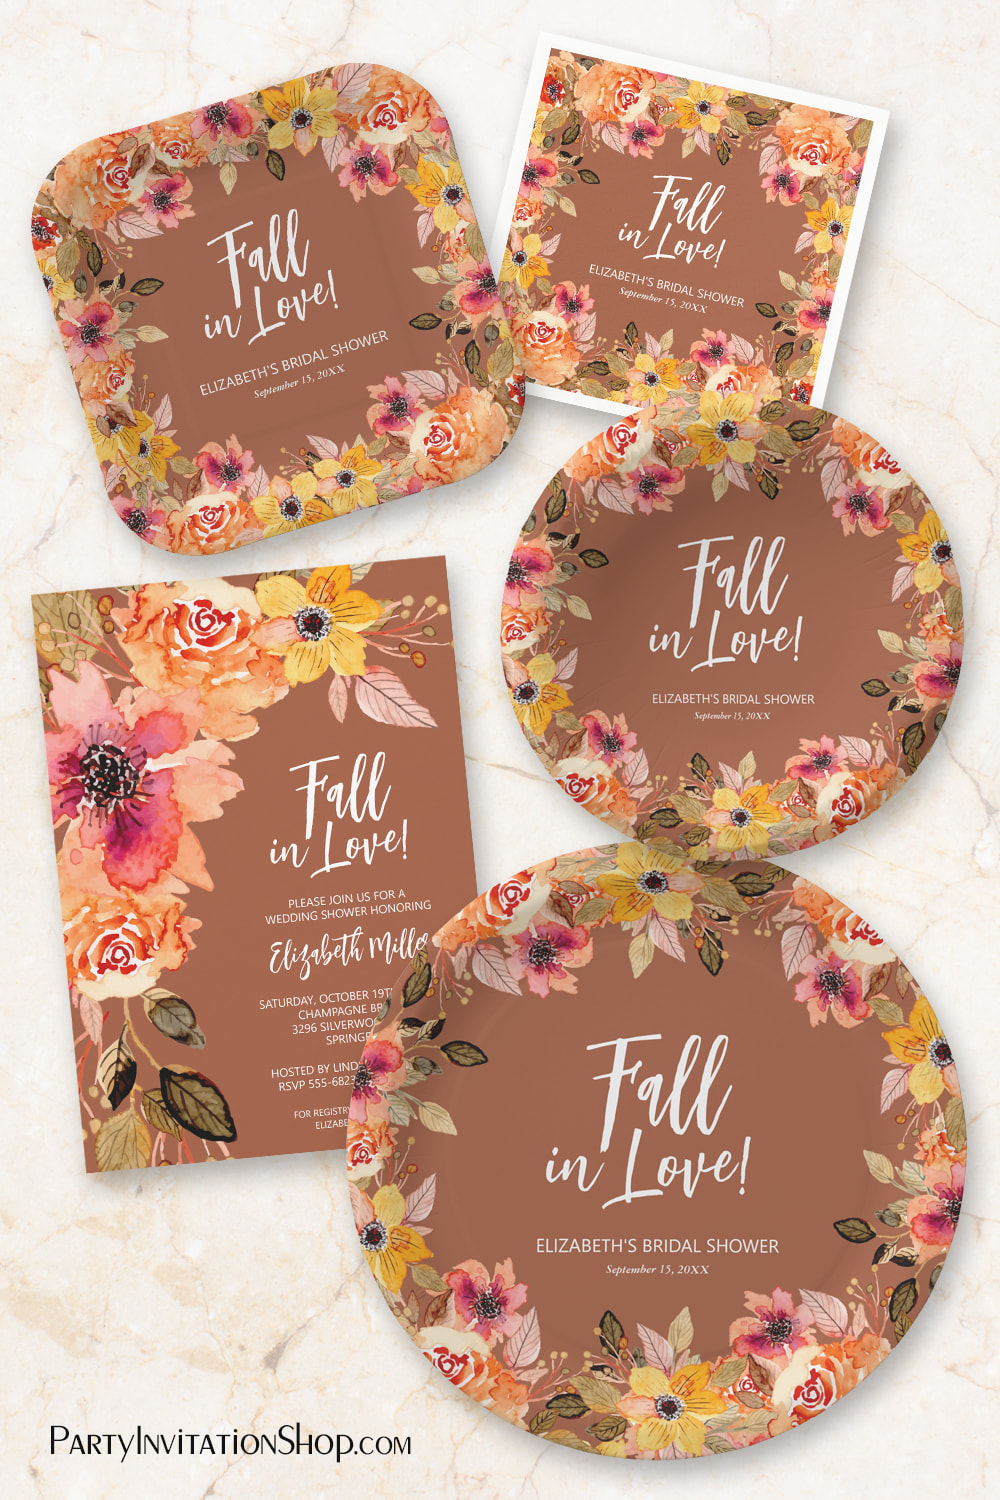 AUTUMN FLOWERS AND FOLIAGE COLLECTION